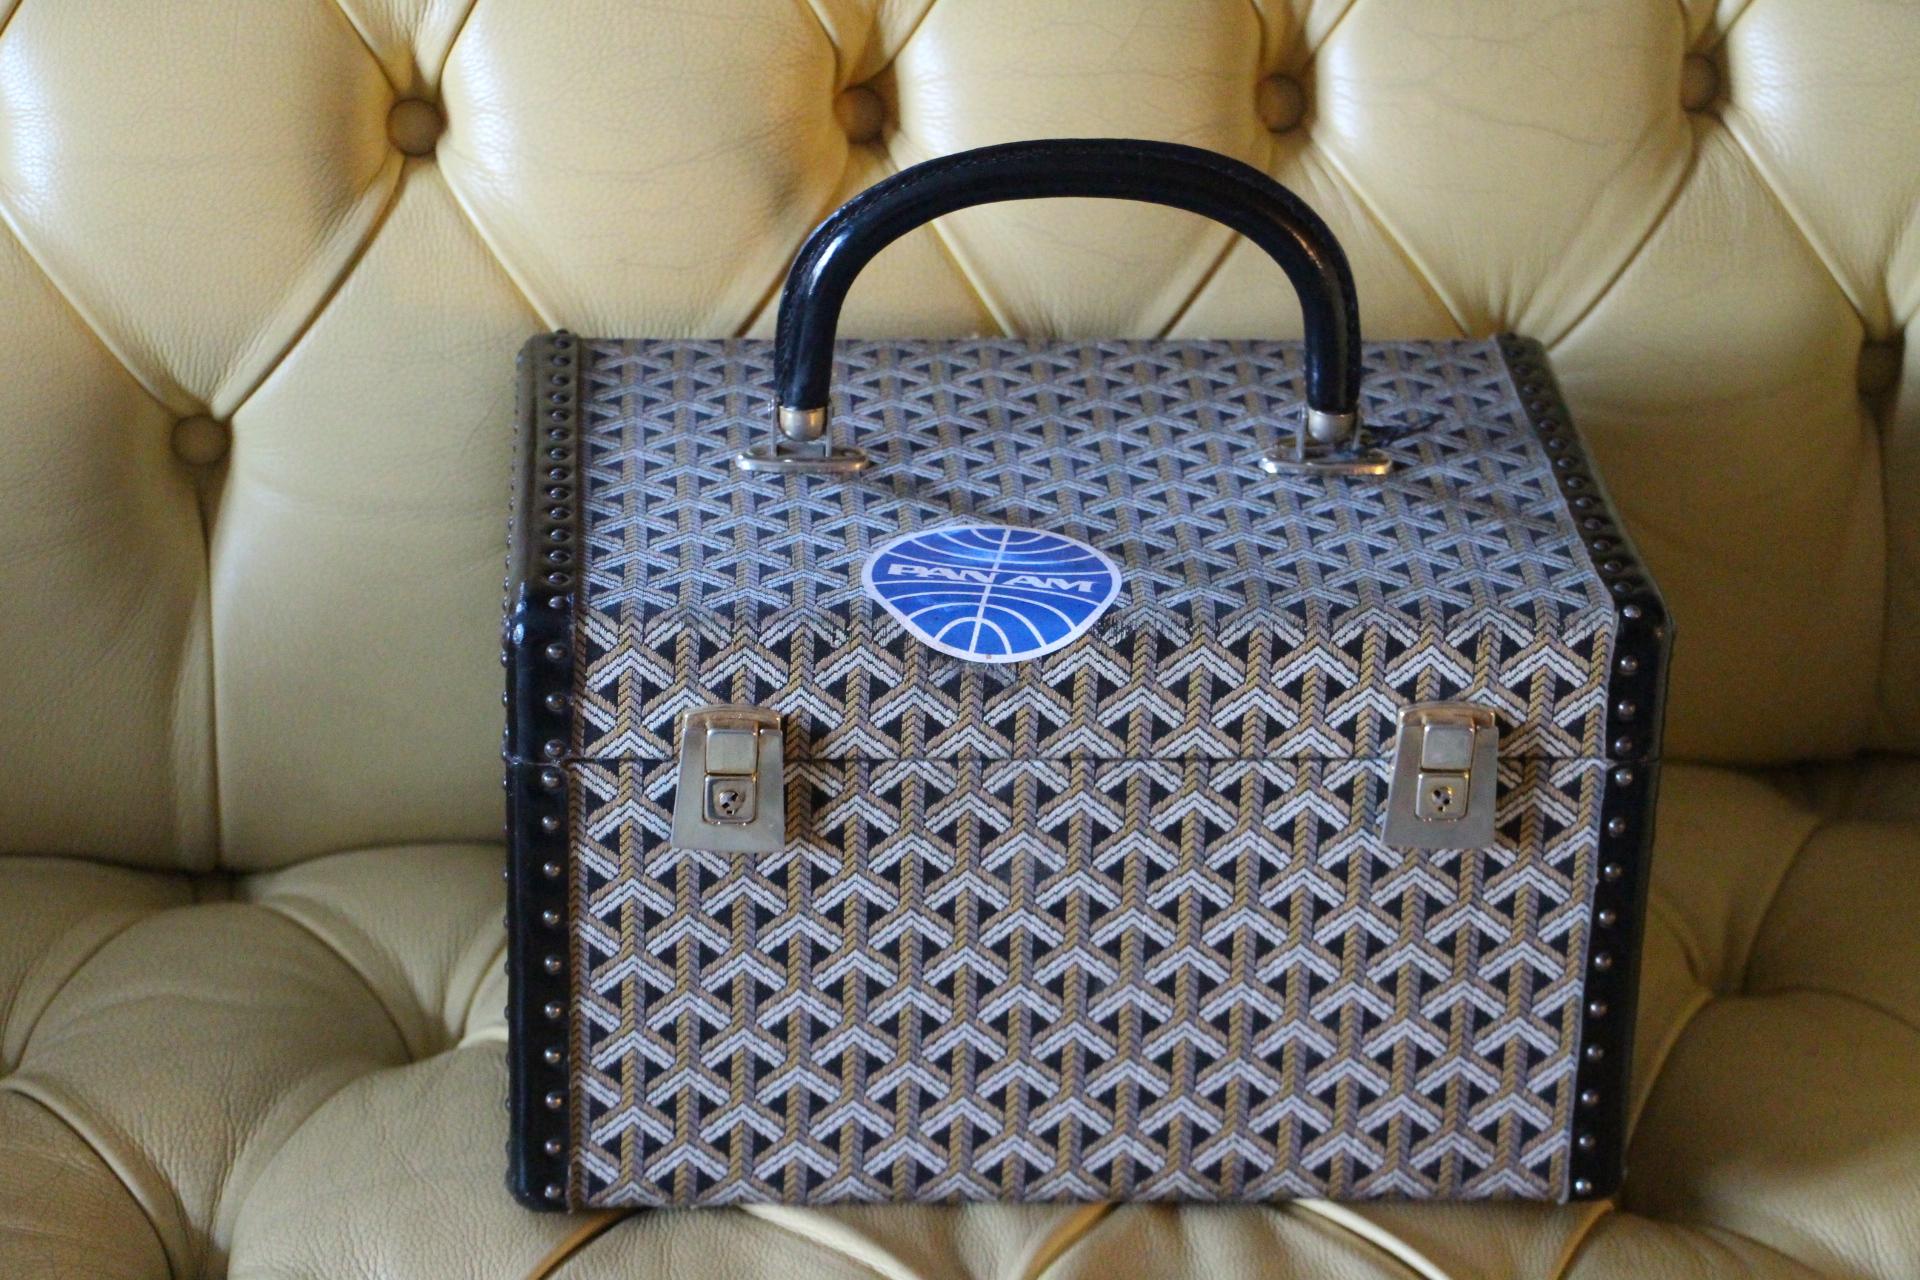 It is an extremely rare vintage jewelry case or train case made by Goyard. It features its famous 